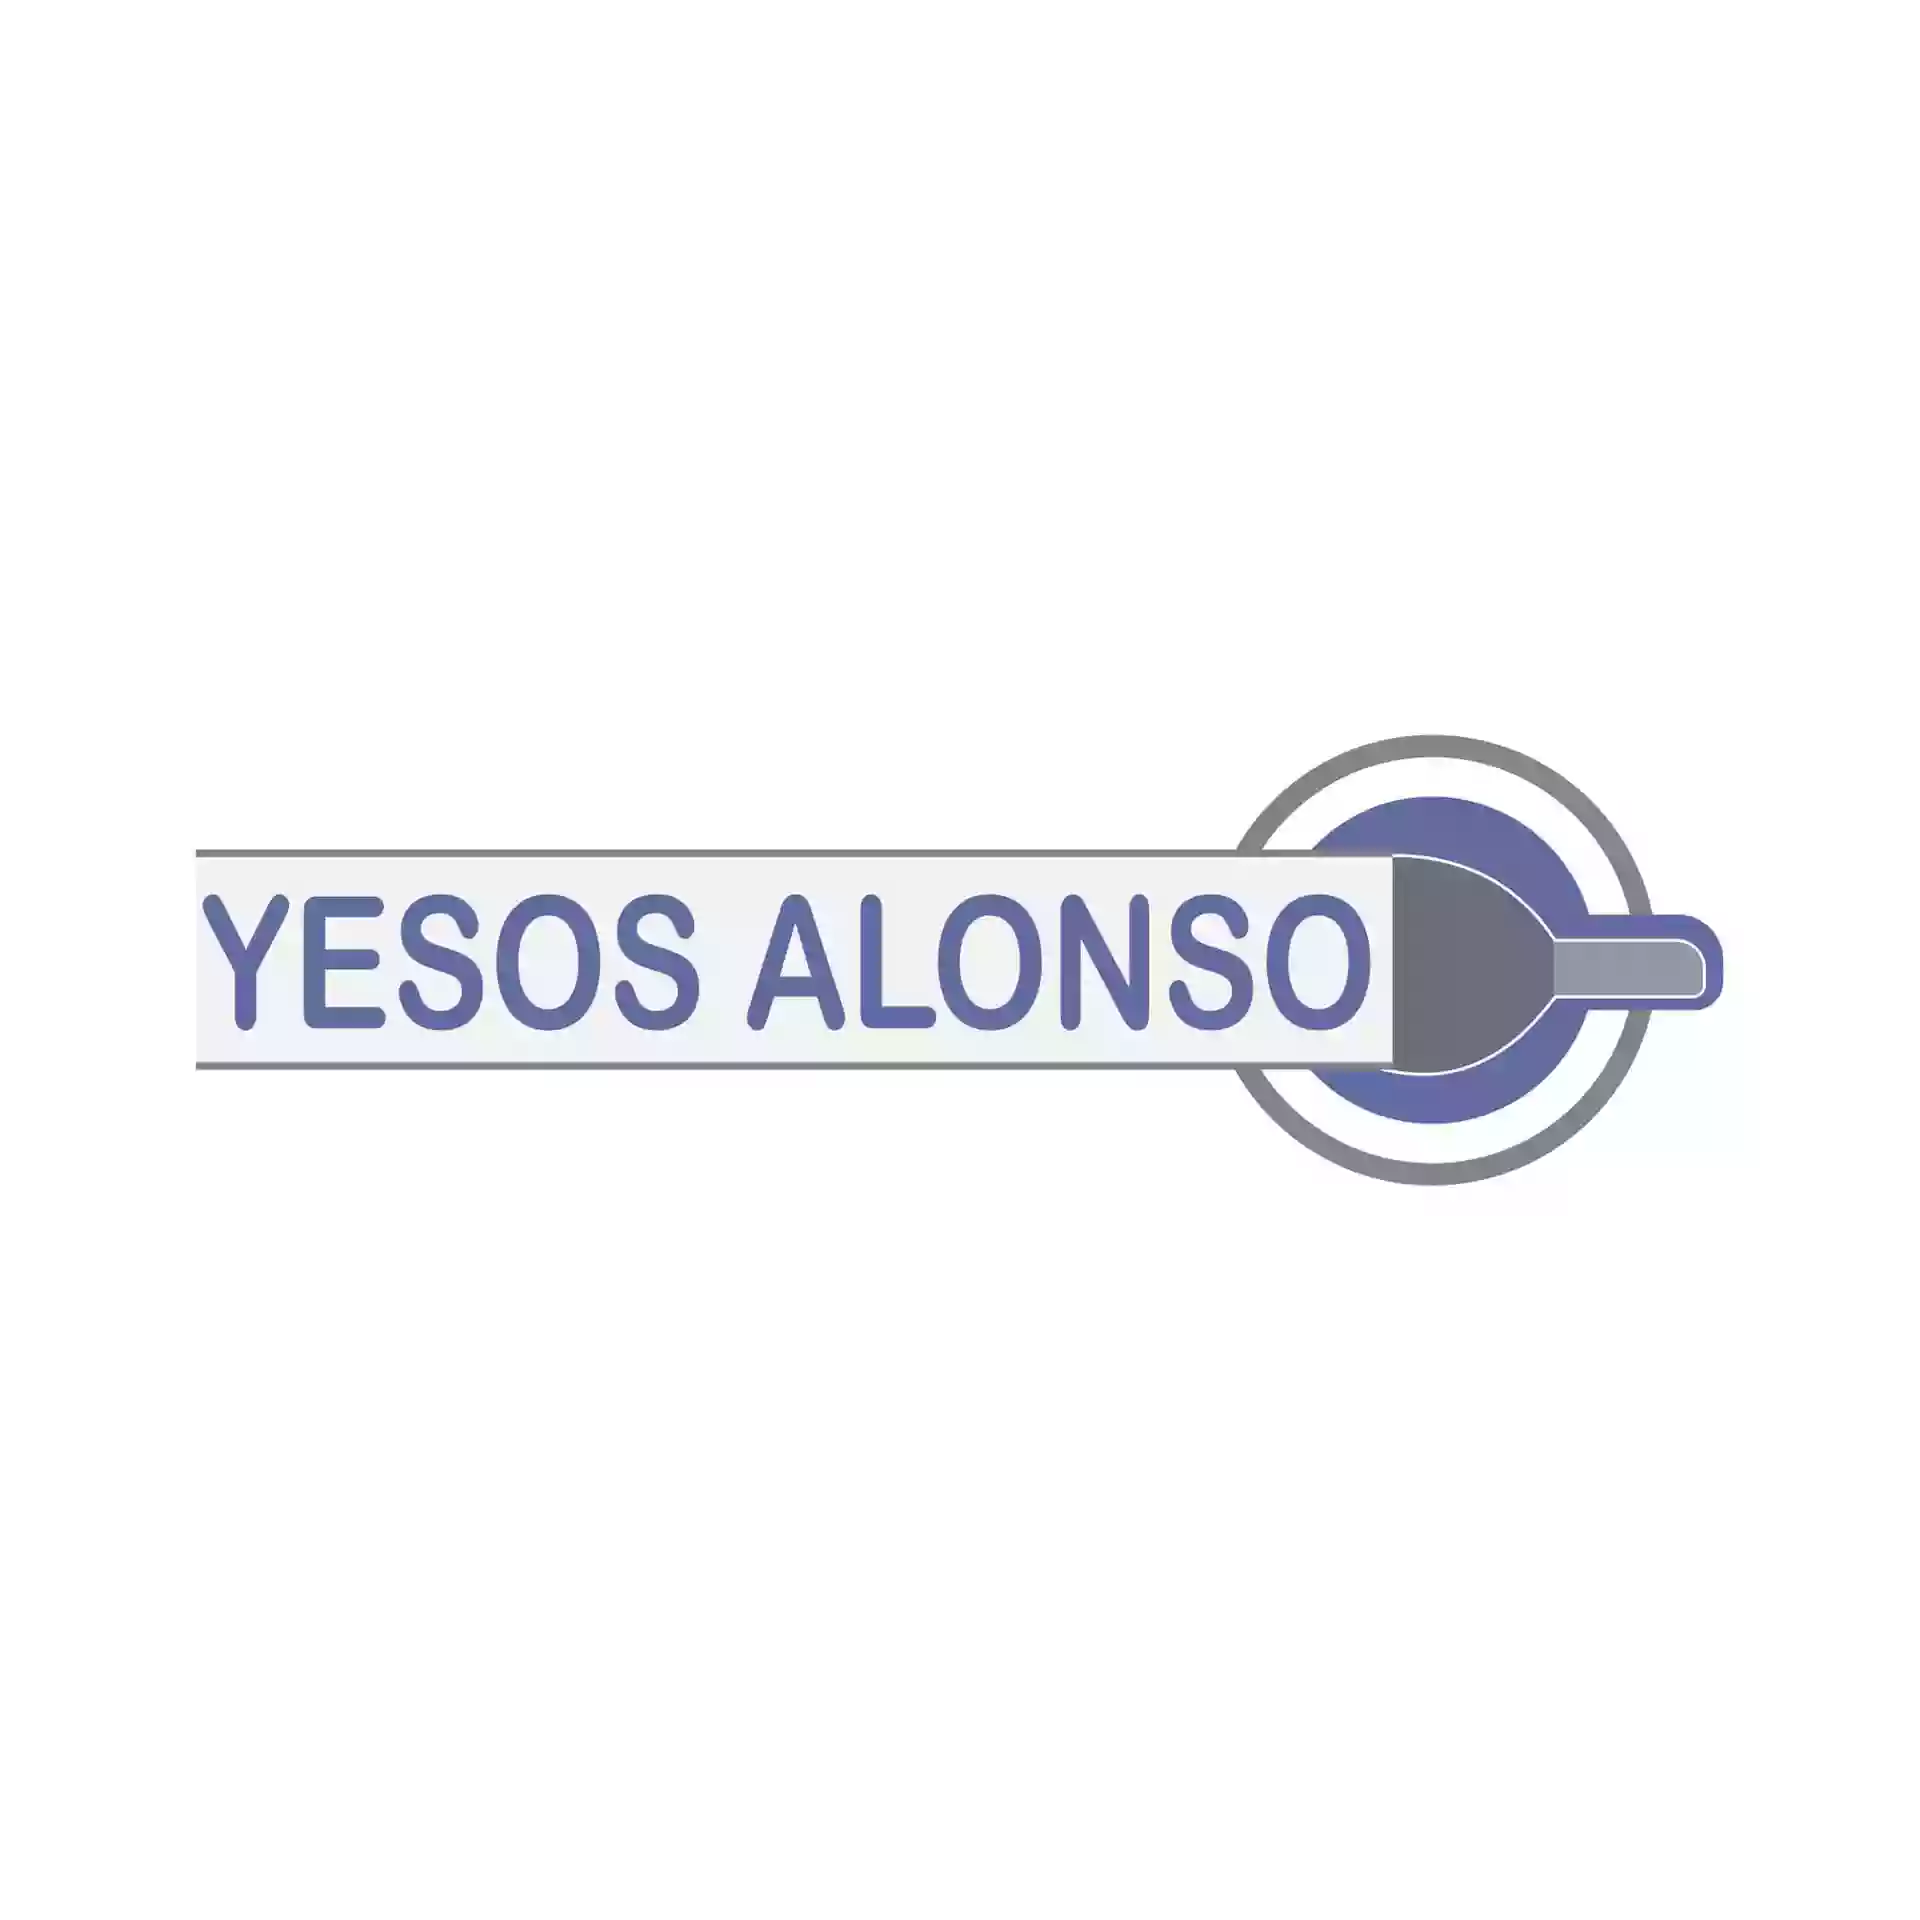 Yesos Alonso